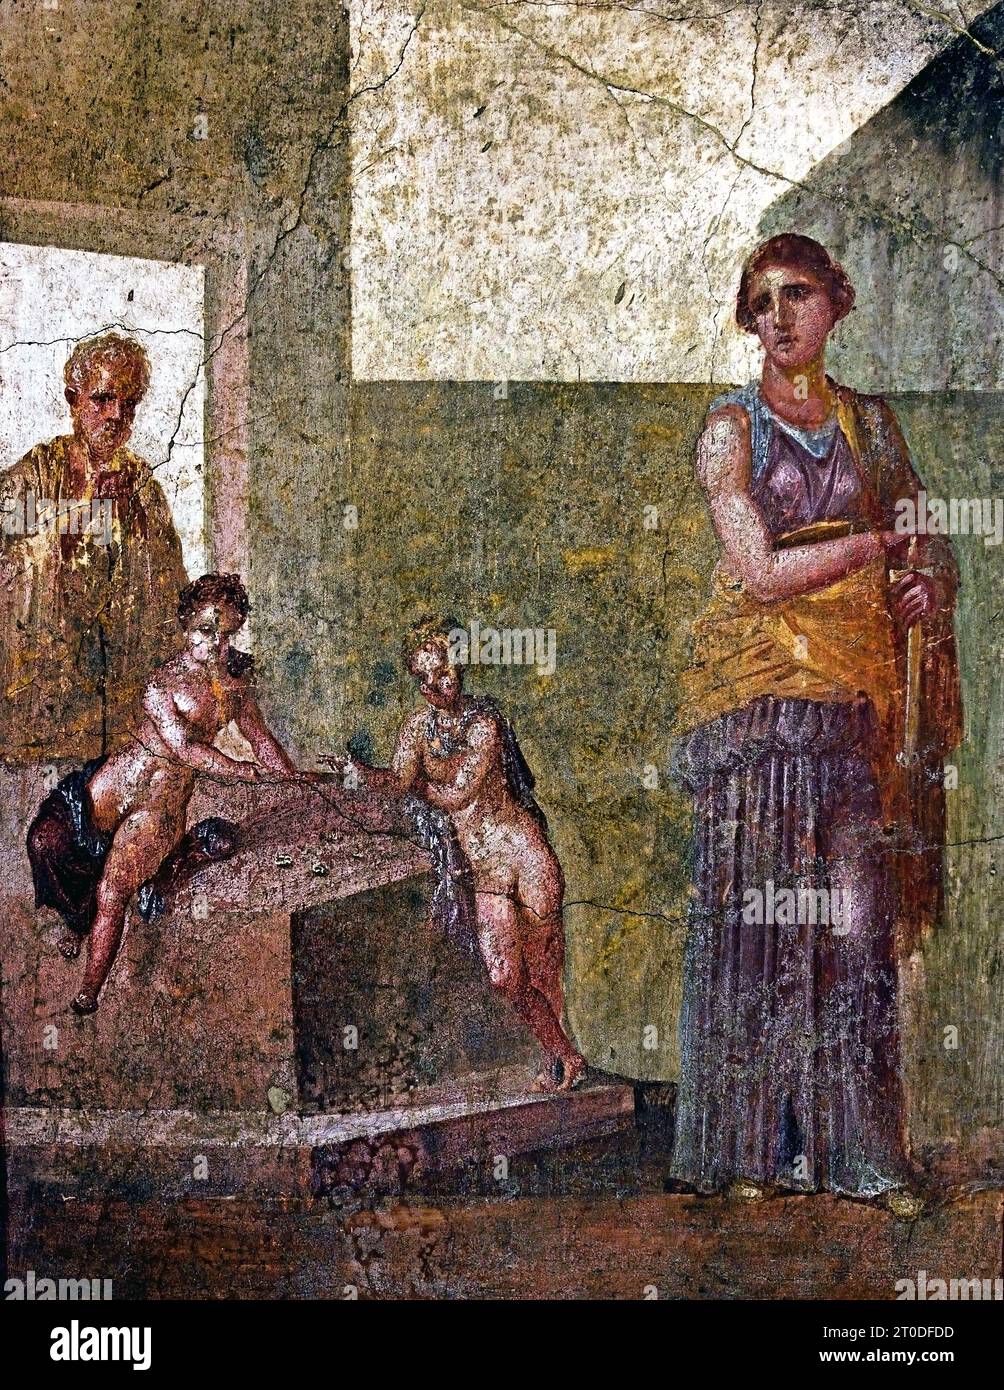 Medea 62-79 AD The little ones who are sadly playing on a podium under the watchful gaze of the old pedagogue, foretells the imminent drama. Fresco Pompeii Roman City is located near Naples in the Campania region of Italy. Pompeii was buried under 4-6 m of volcanic ash and pumice in the eruption of Mount Vesuvius in AD 79. Italy Stock Photo